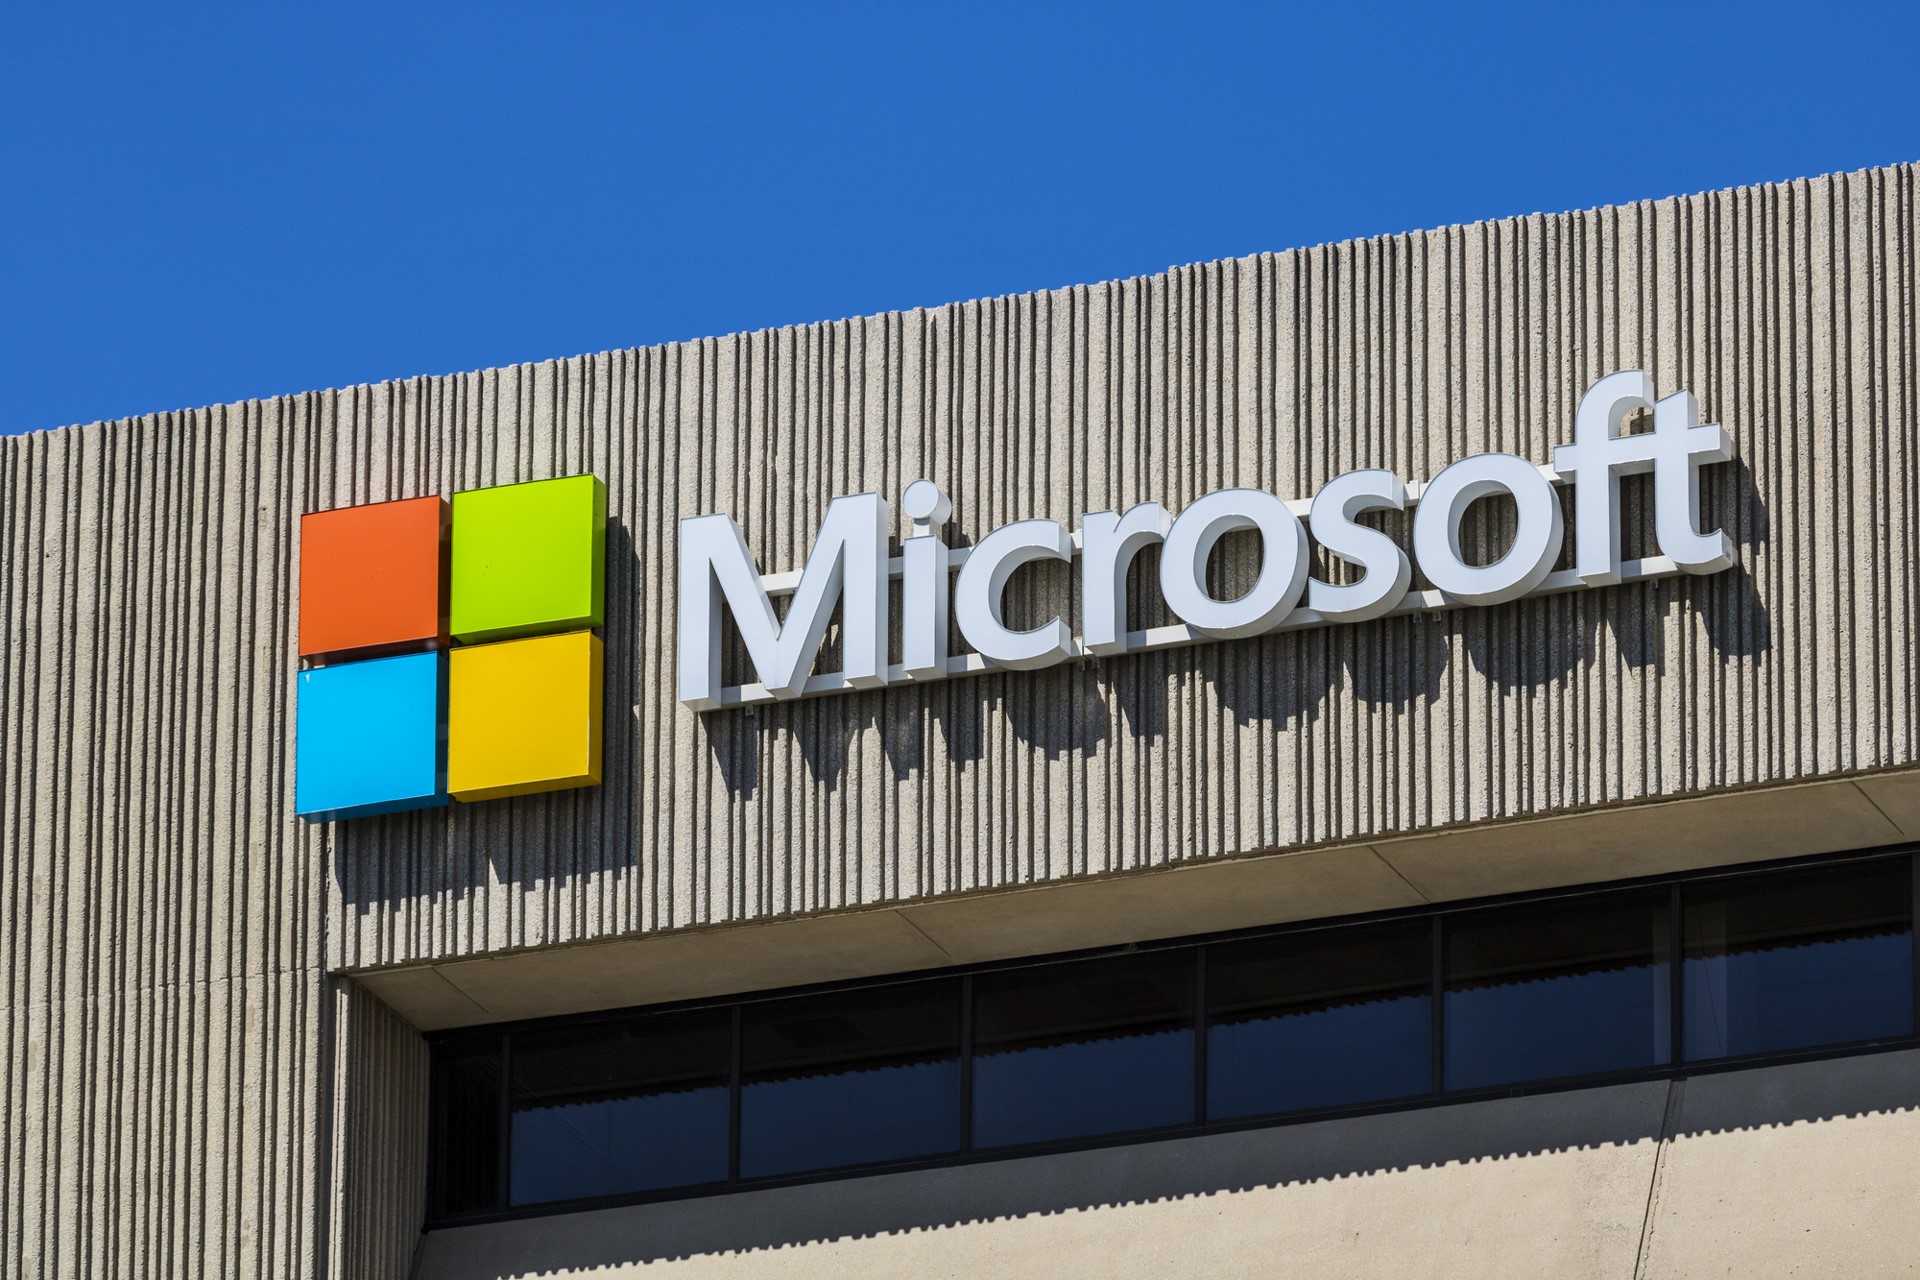 Rajkotupdates.news : Microsoft Gaming Company To Buy Activision Blizzard For RS 5 Lakh Crore